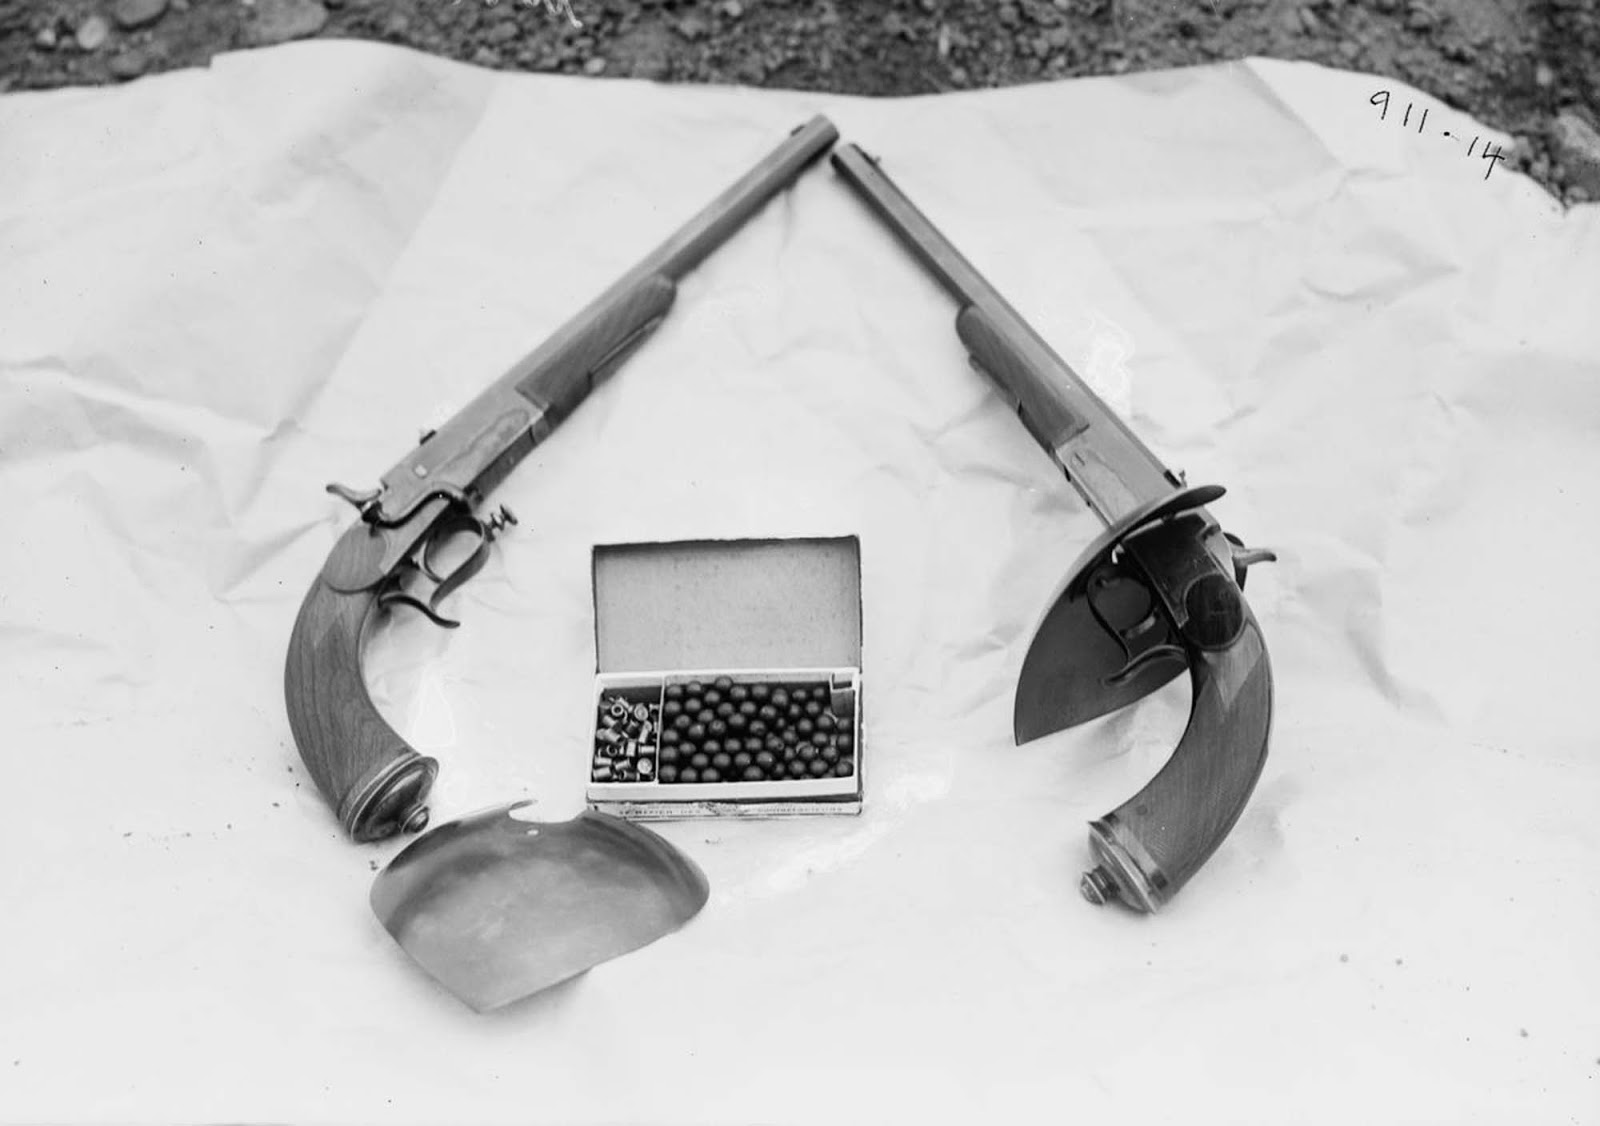 The modified .44caliber blackpowder pistols used in the 1909 exhibition. Note the handguard removed on left (showing mounting bracket), and fitted in place on right for comparison. The cartridge box in the center shows the outsized precussion caps, about the size of a .22 short on the left, and wax .44 diameter balls on the right. 